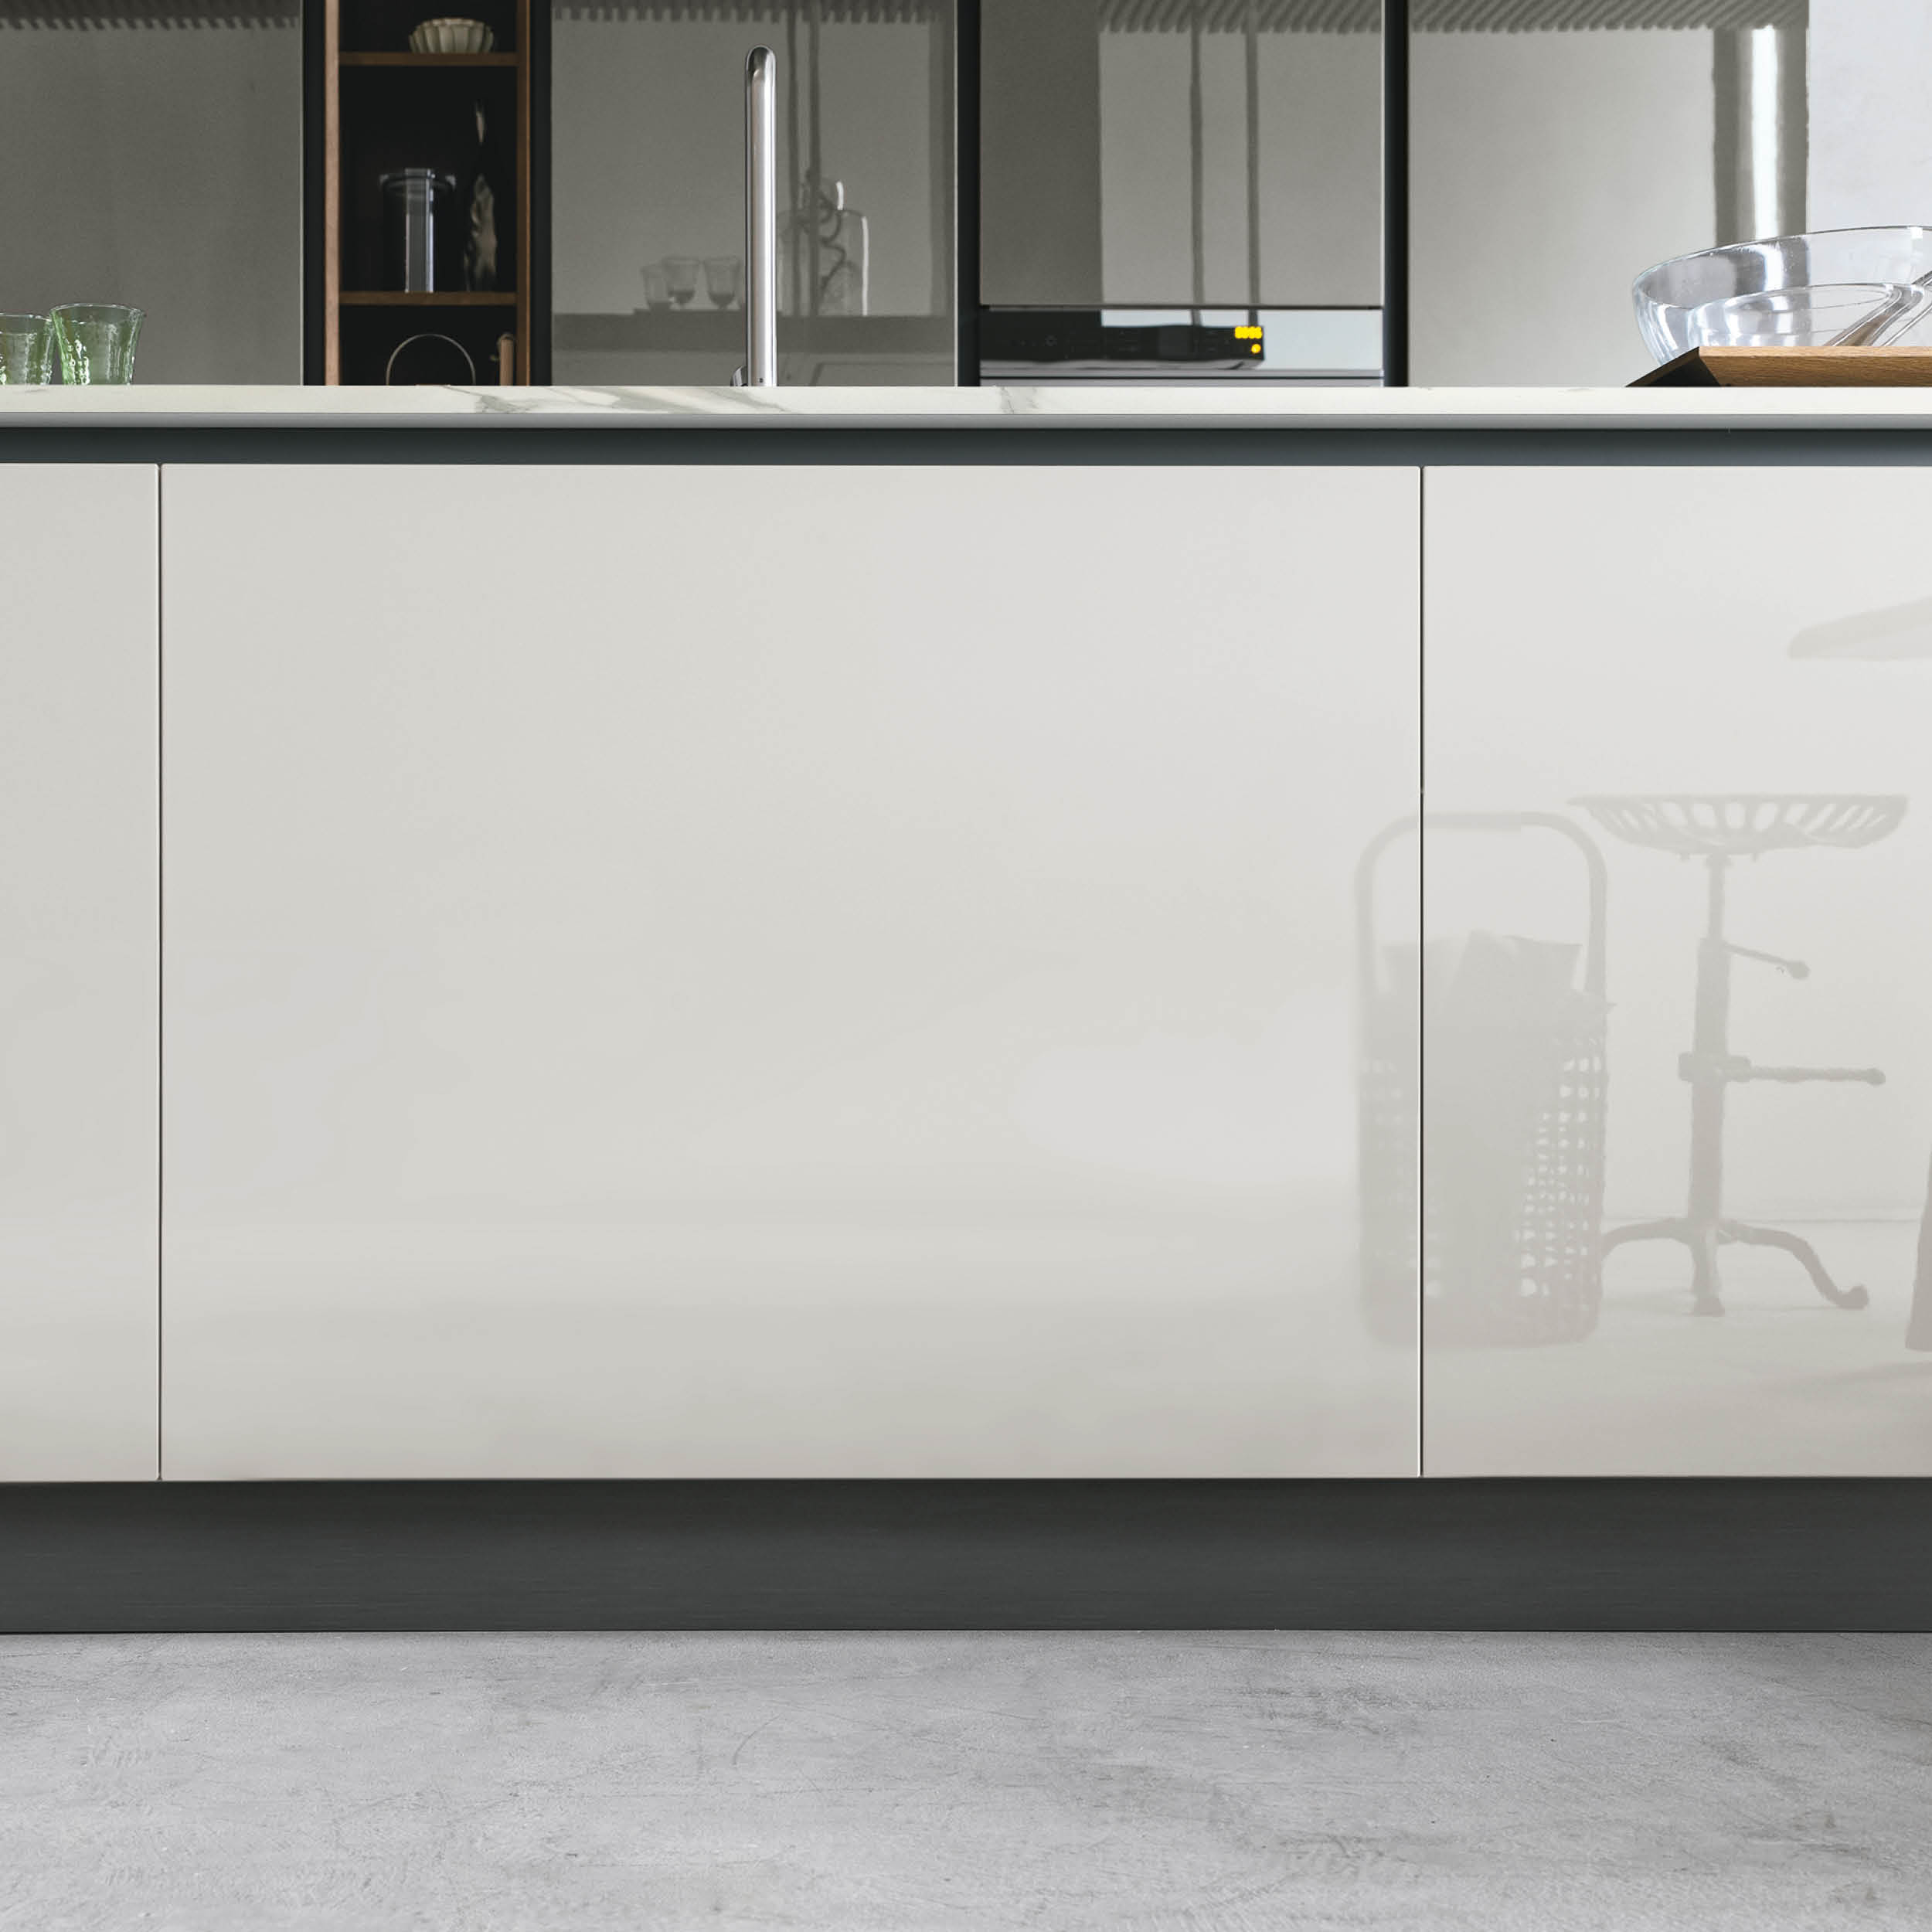 Modern Kitchens NYC - Aleve Laccato UV Neve Lucido 2 - Stosa Cucine